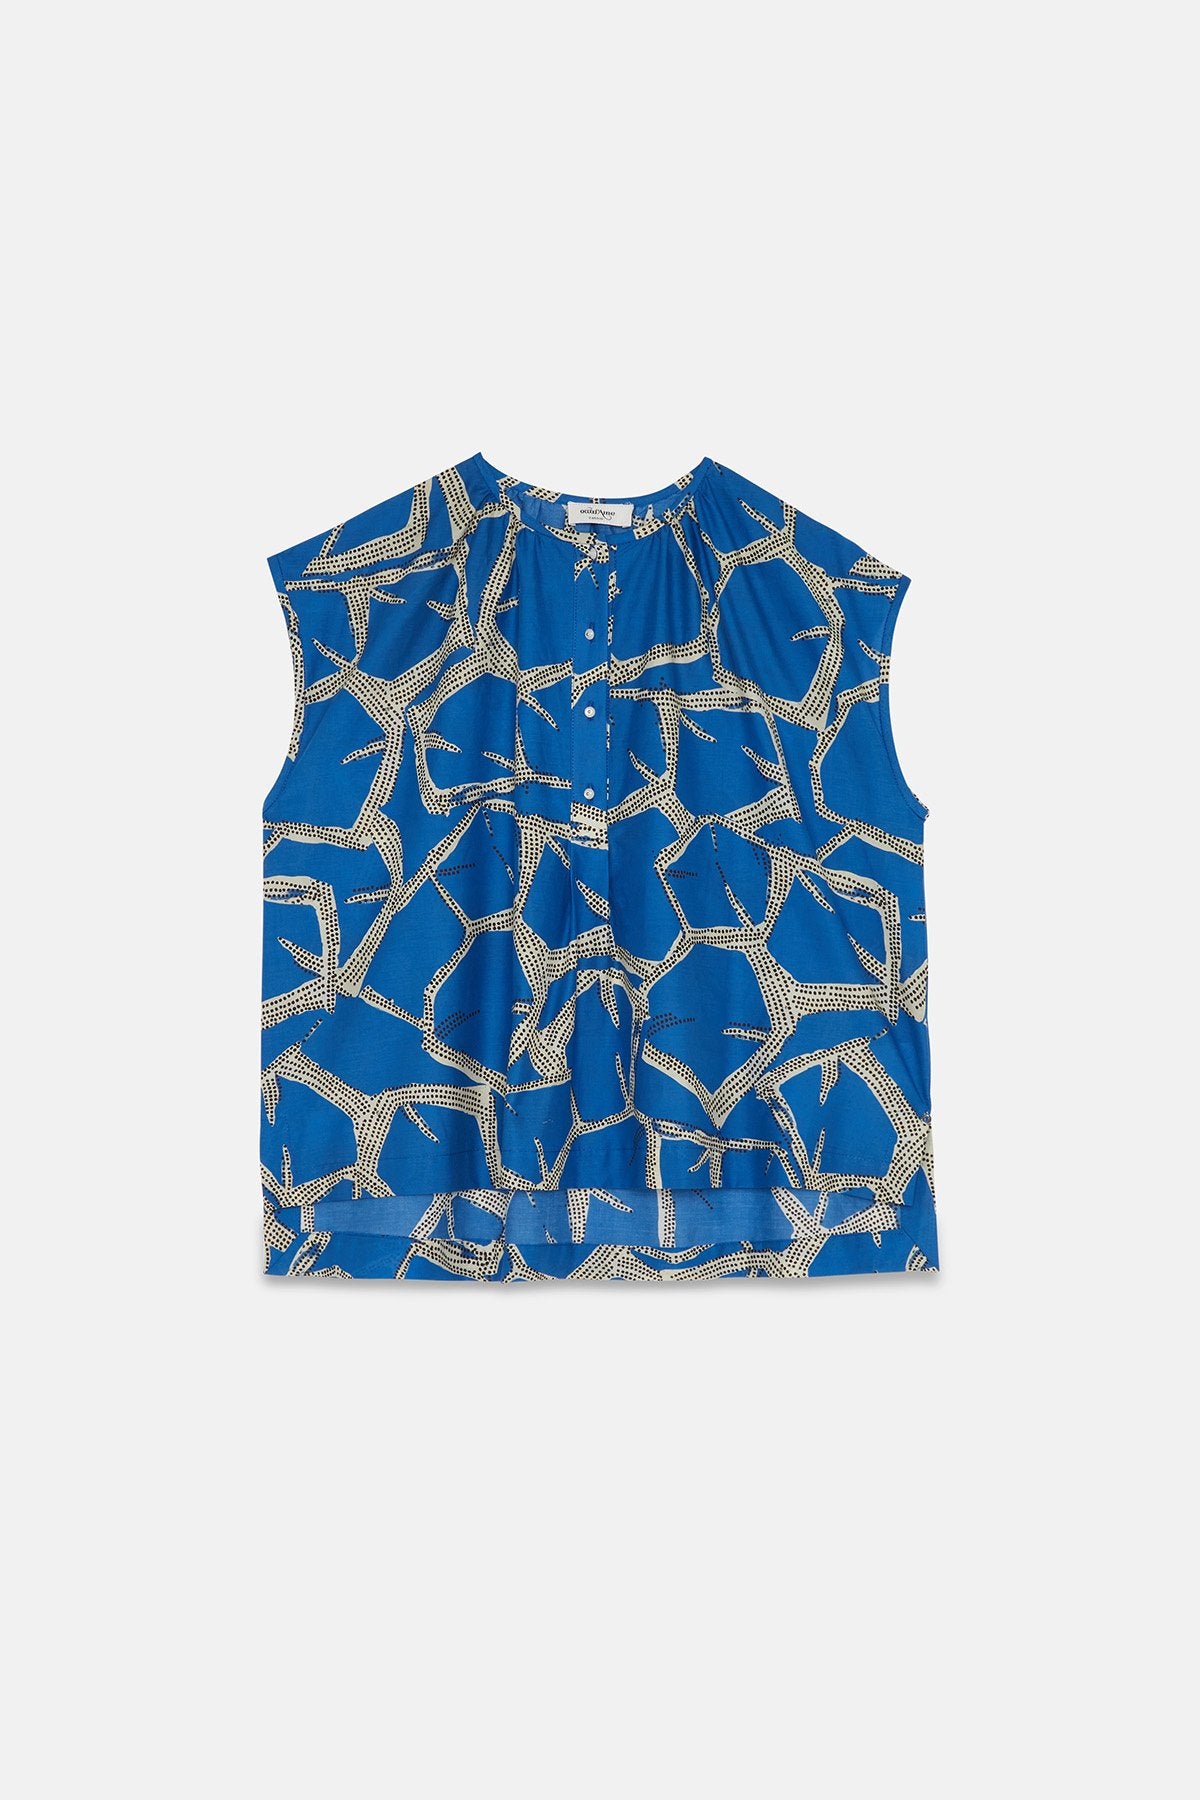 Printed Cotton Shirt in blue by Ottod'ame